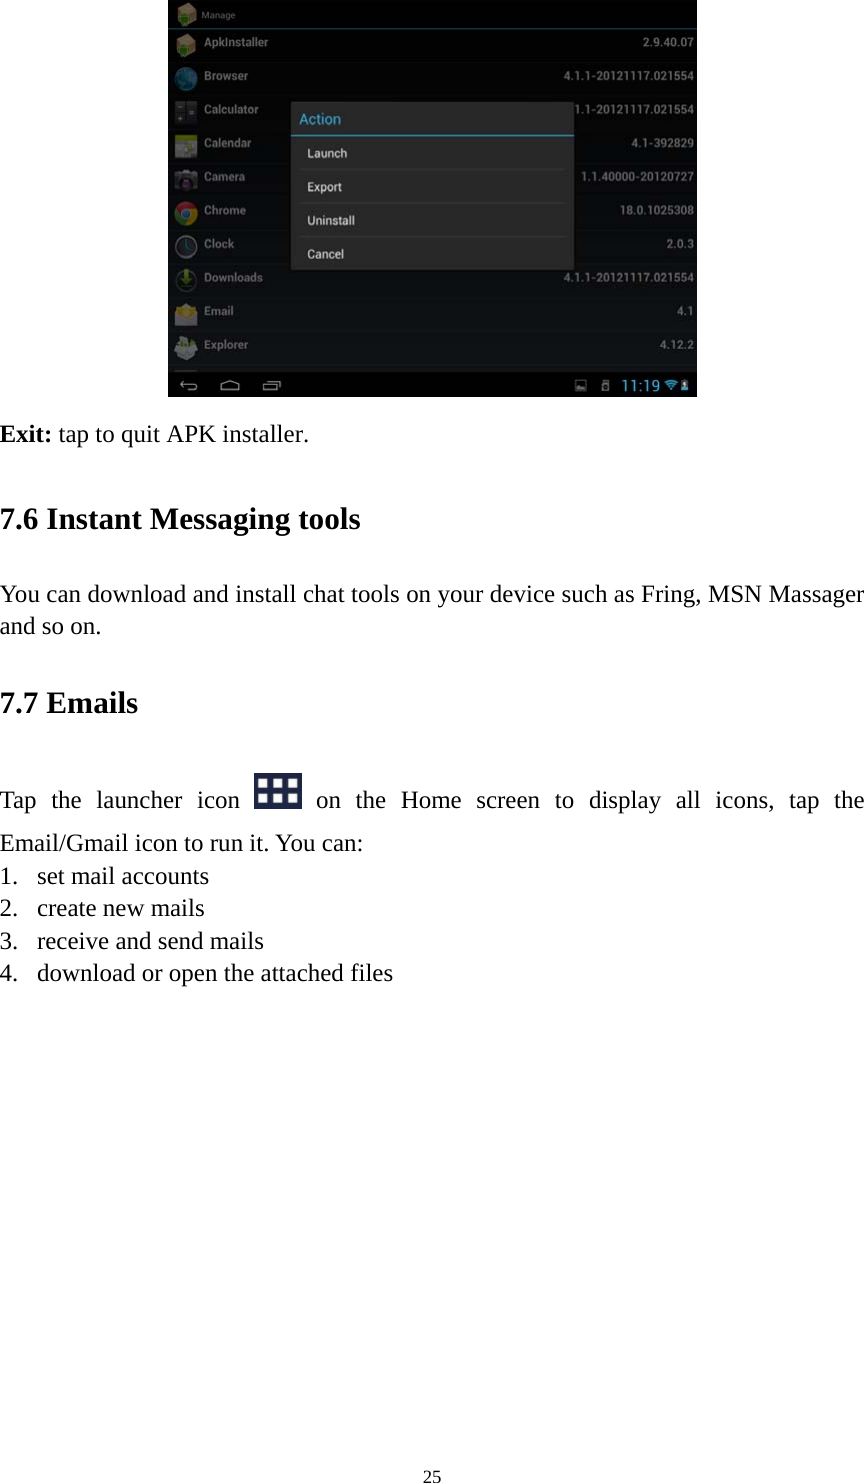 25  Exit: tap to quit APK installer.   7.6 Instant Messaging tools   You can download and install chat tools on your device such as Fring, MSN Massager and so on.   7.7 Emails Tap the launcher icon   on the Home screen to display all icons, tap the Email/Gmail icon to run it. You can:   1. set mail accounts 2. create new mails 3. receive and send mails   4. download or open the attached files    